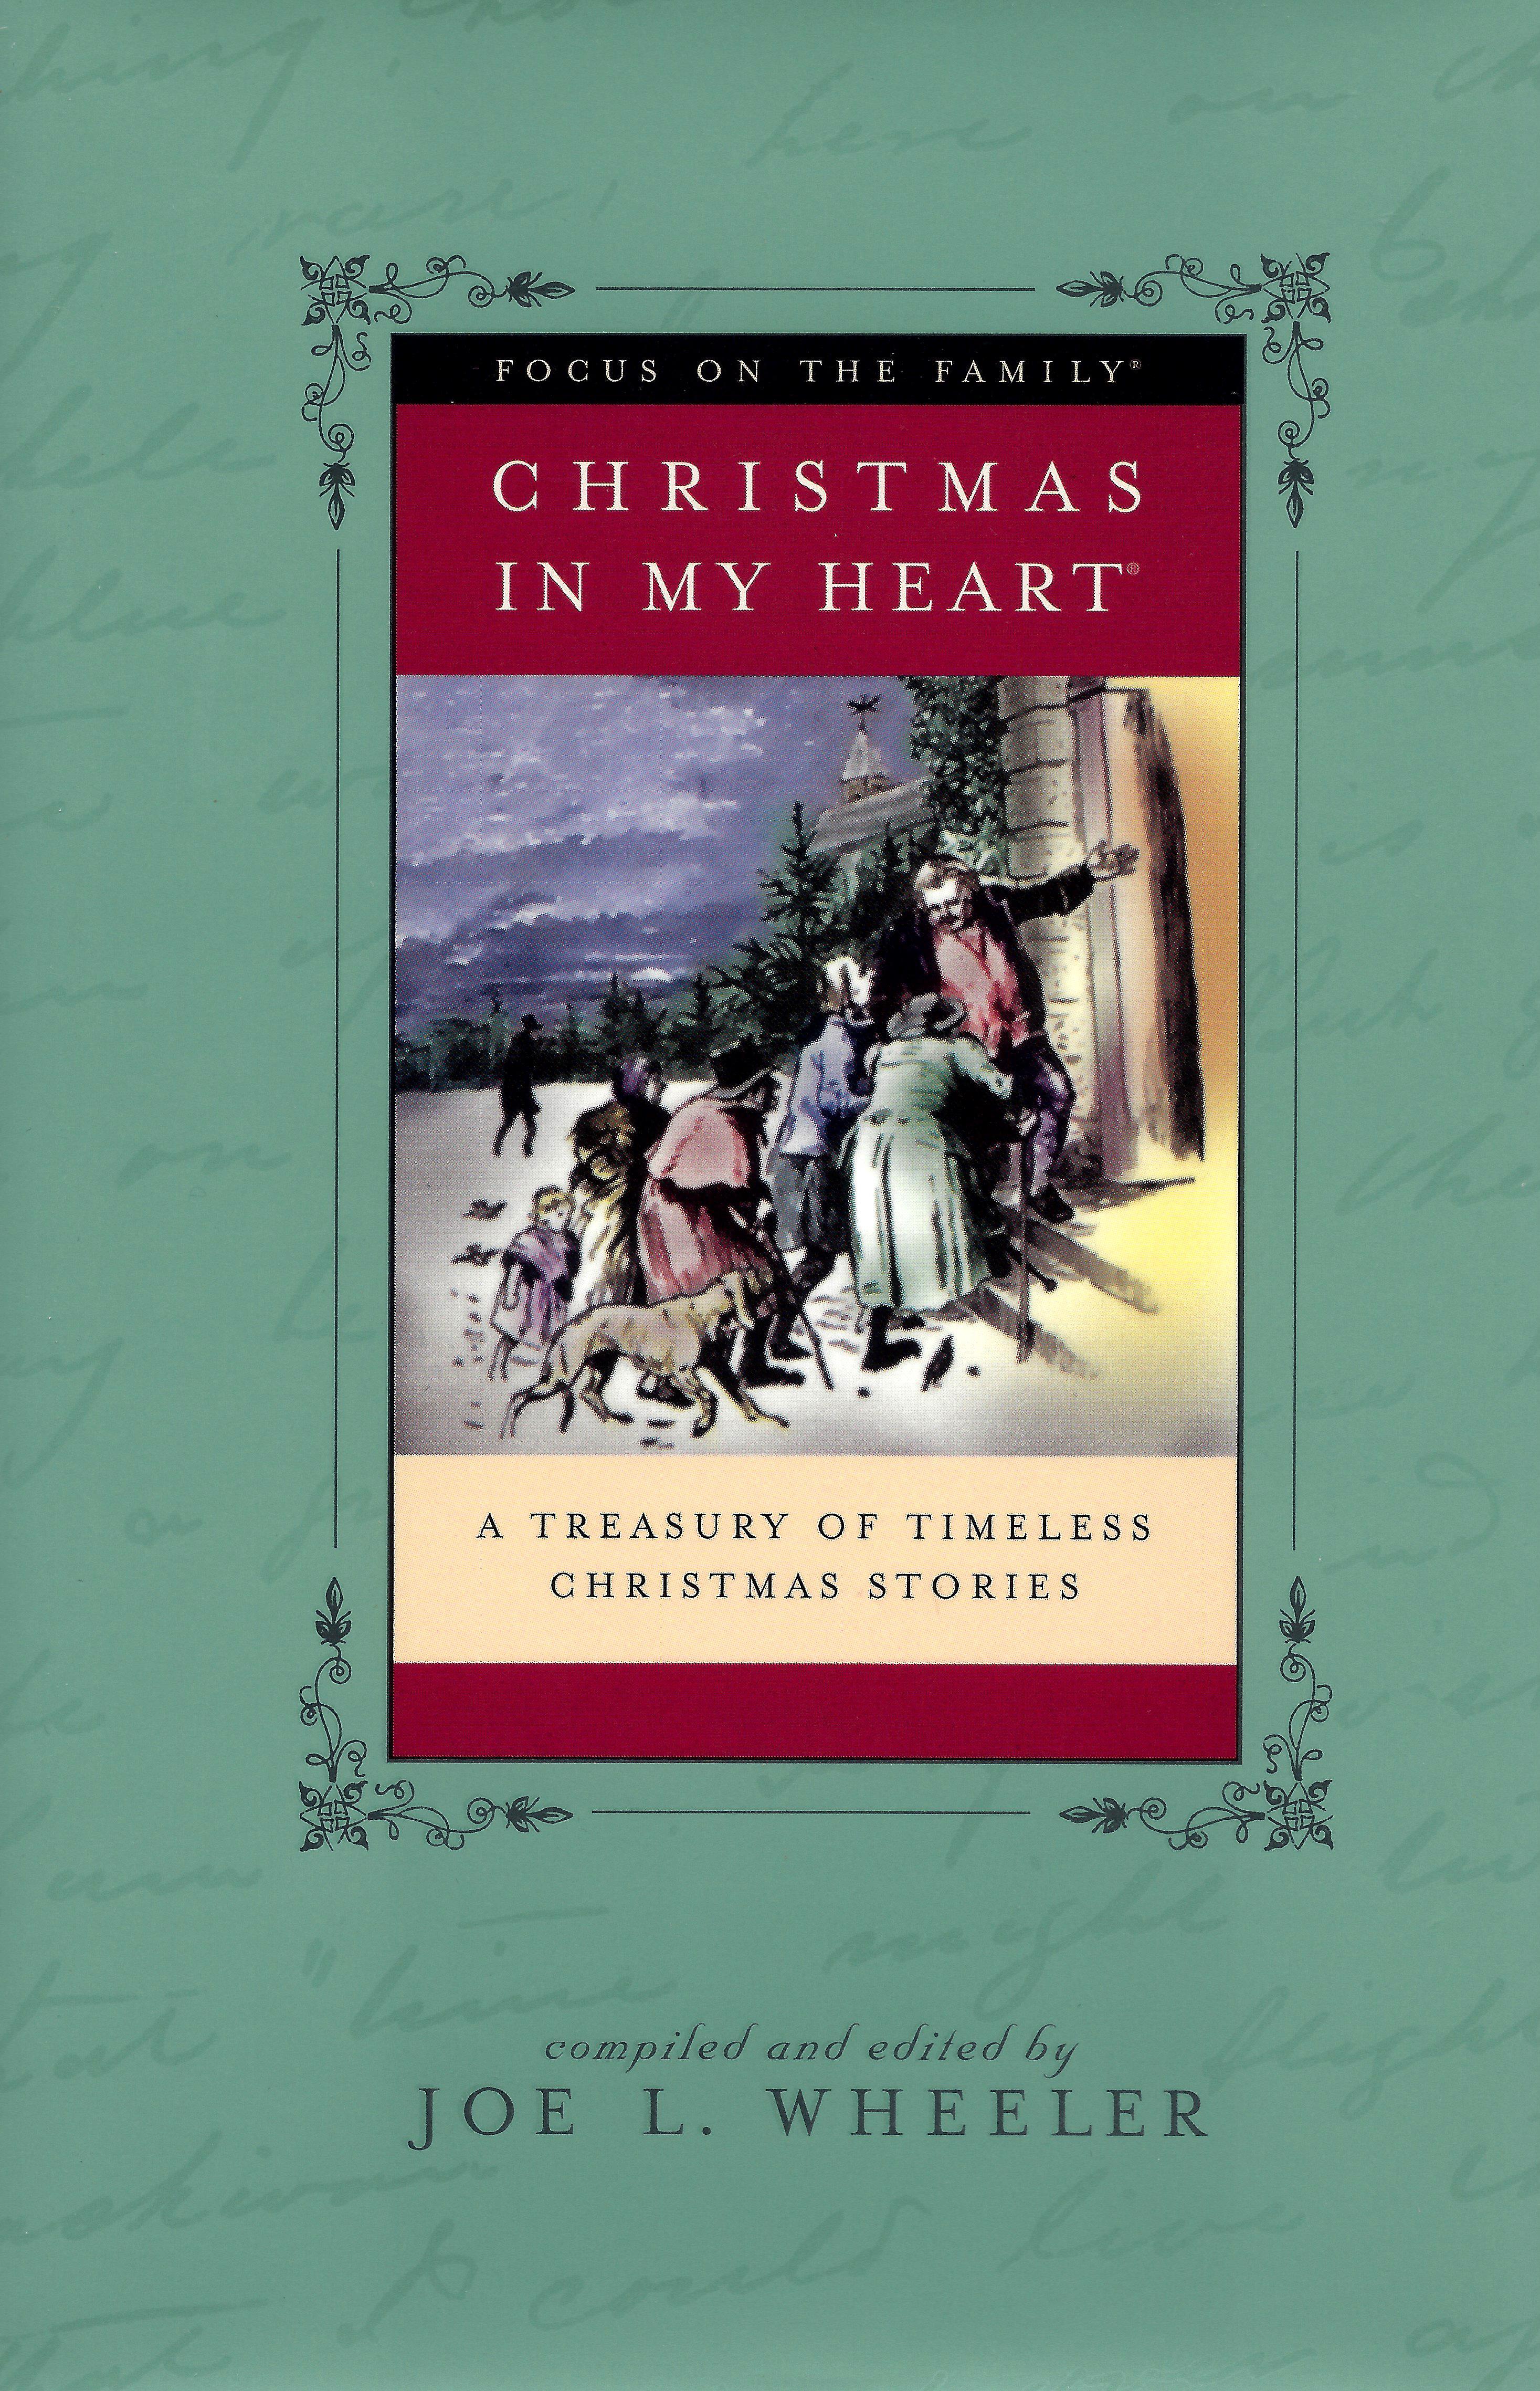 Christmas in my Heart: A Treasury of Timeless Christmas Stories by Joe L. Wheeler